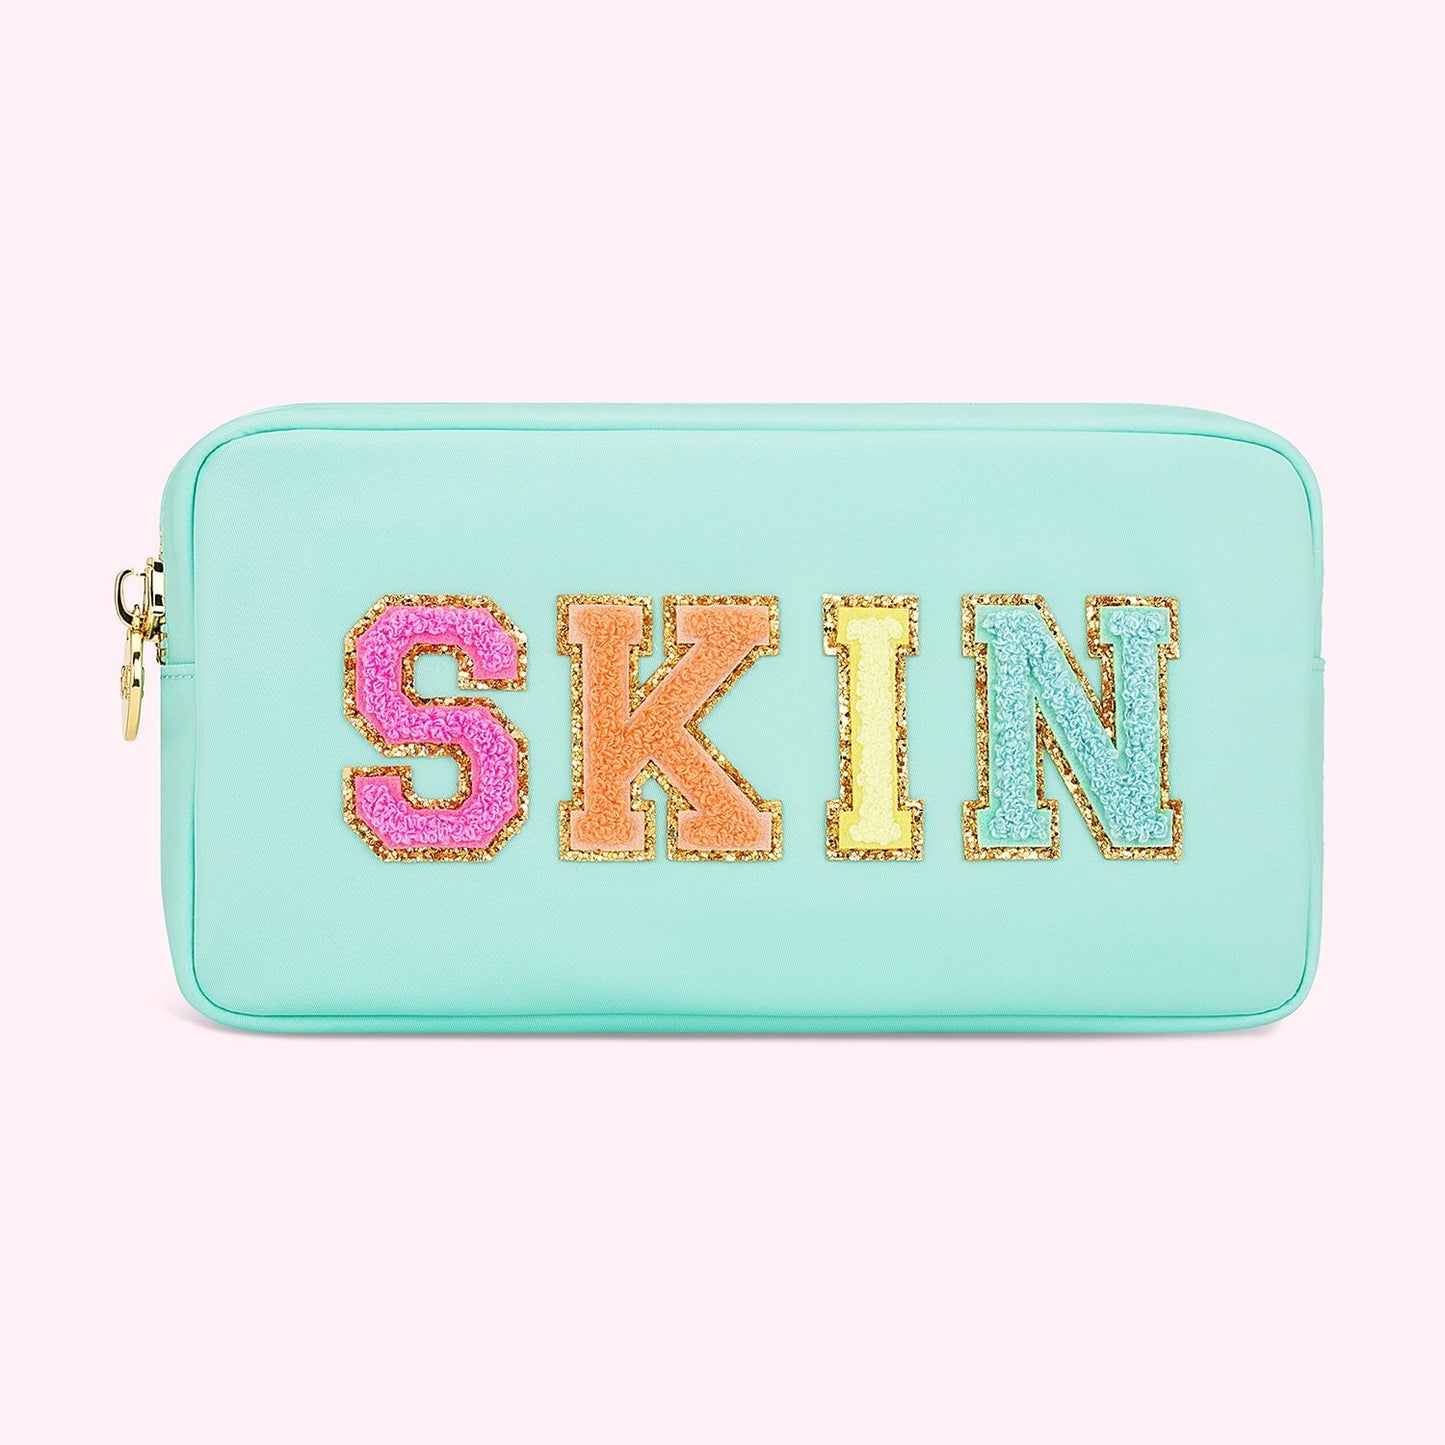 Cotton Candy "Skin" Small Pouch